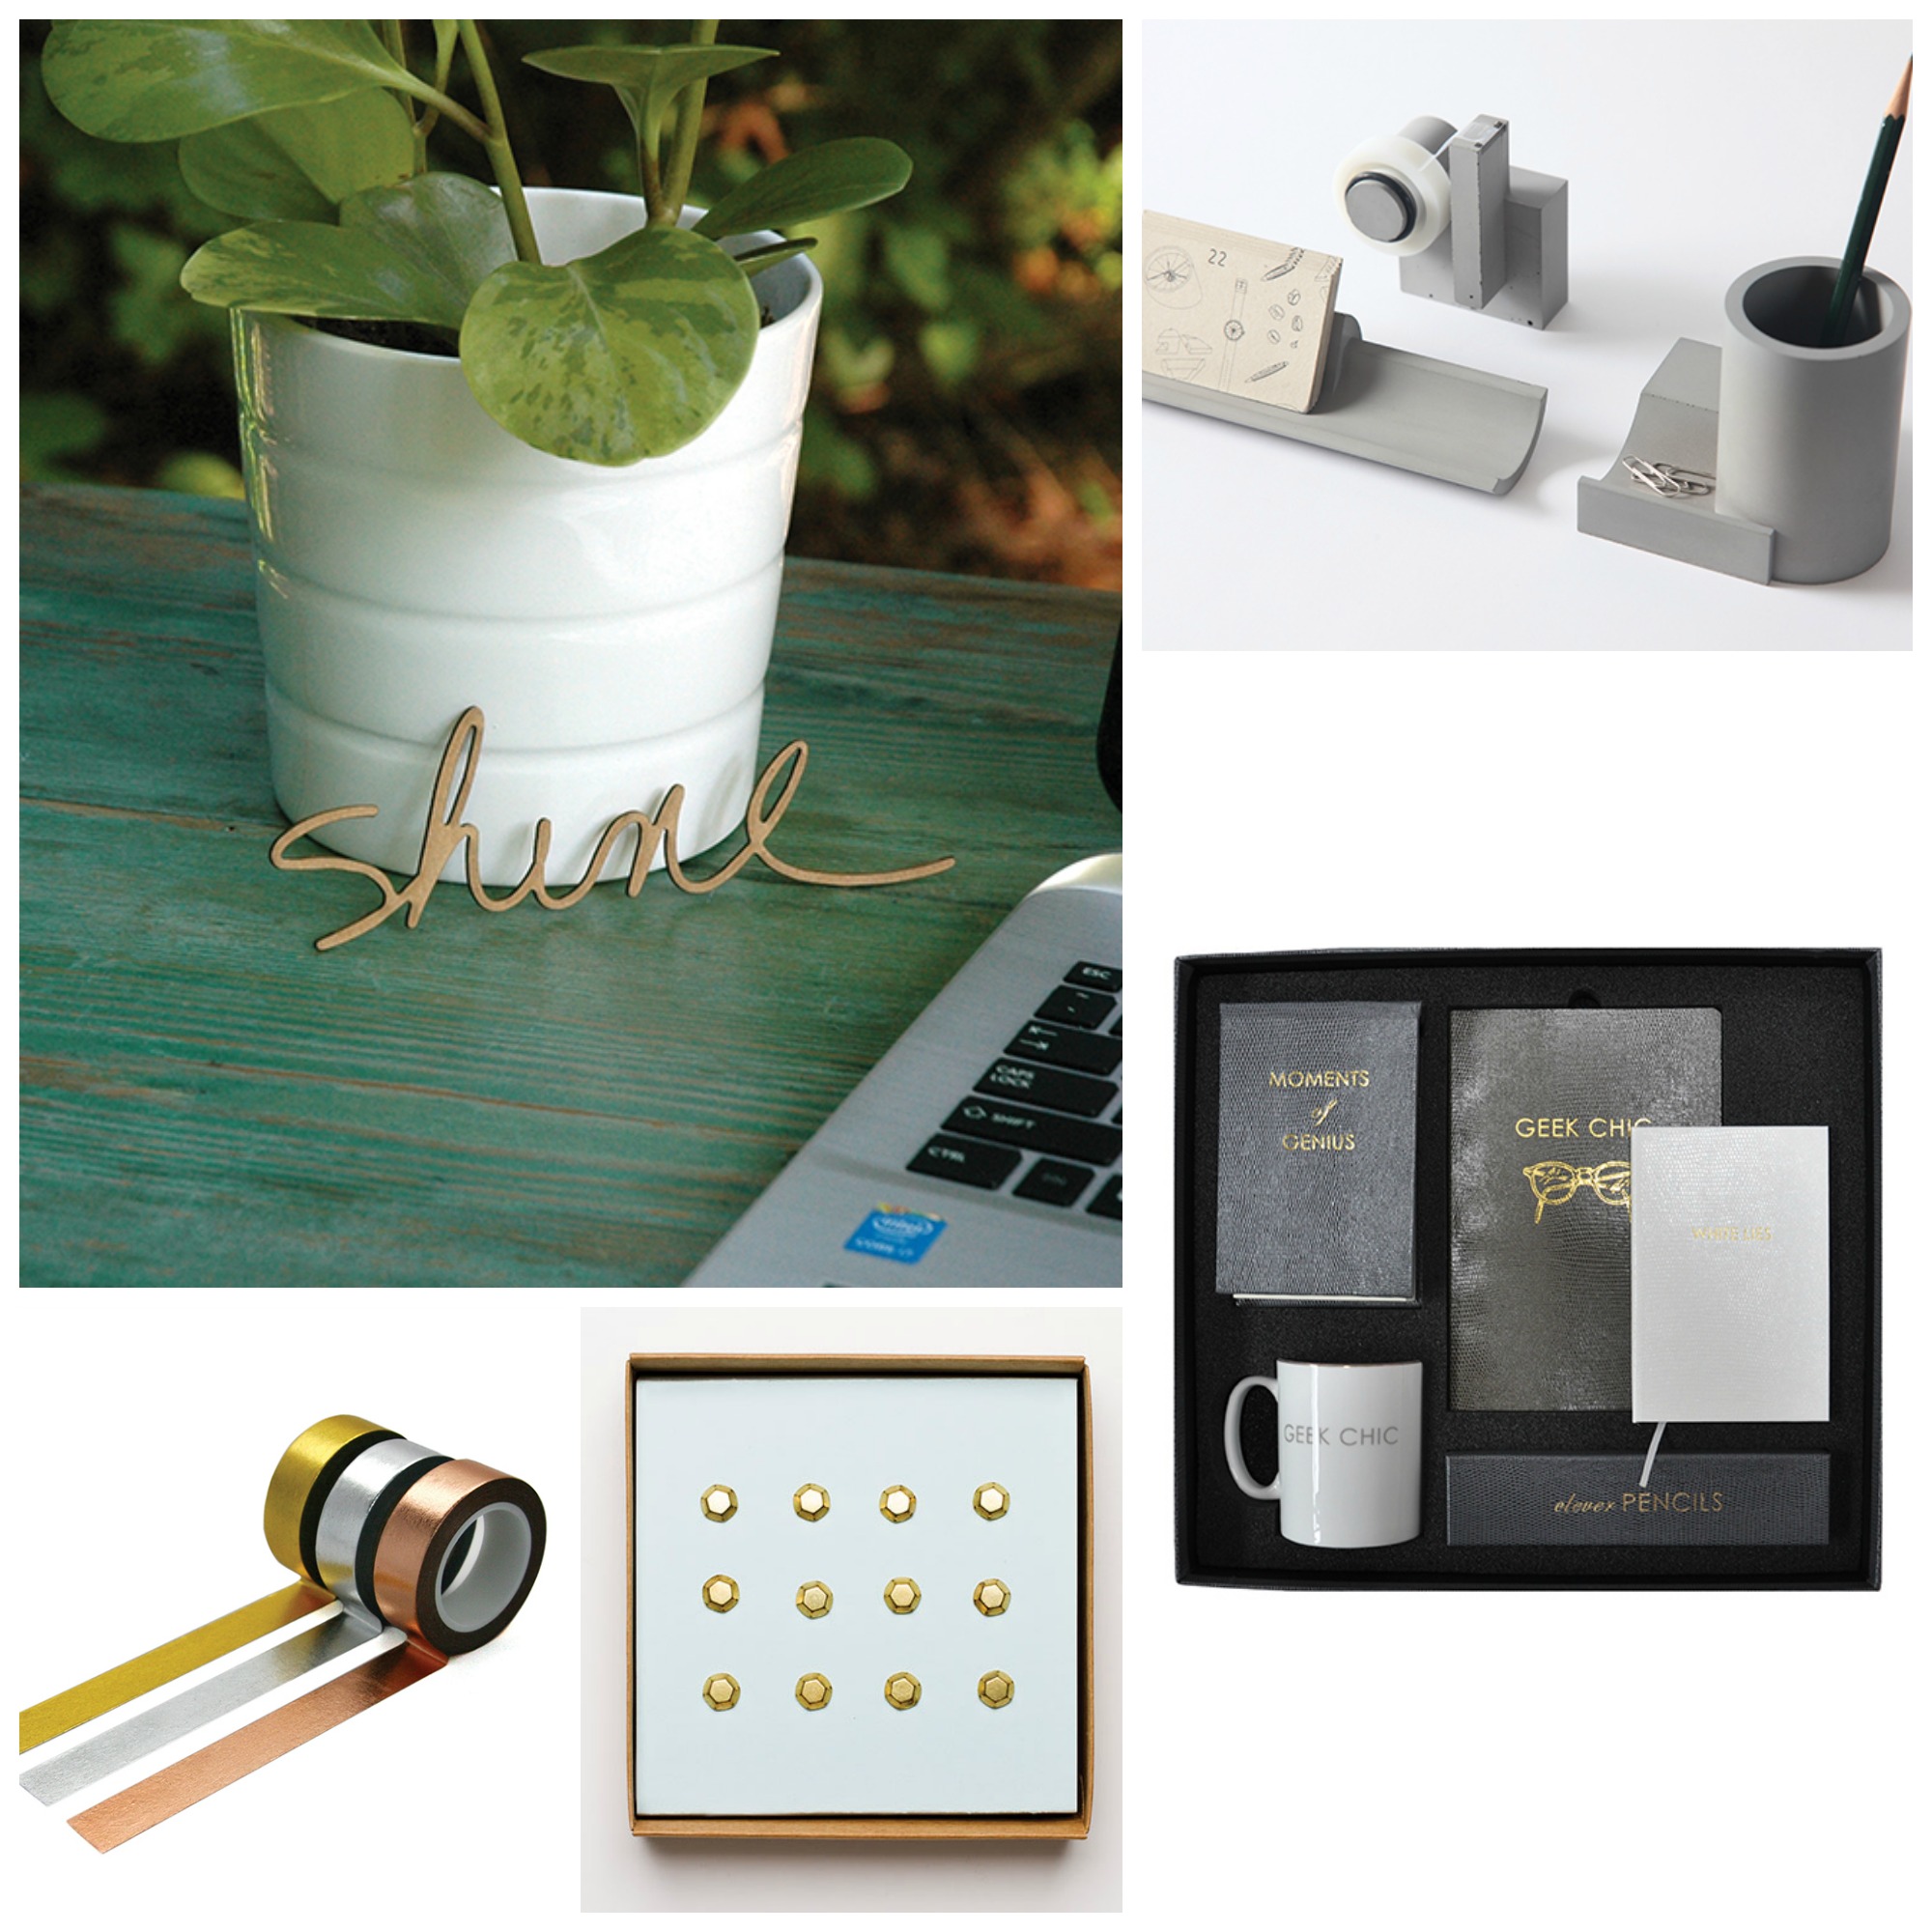 A strong assortment of neutral selections will blend with customers’ existing home décor as they infuse it with modern chic. From left to right: Colleen Attara, Mollaspace, Sloane Stationery, Iron Curtain Press, and Beve.